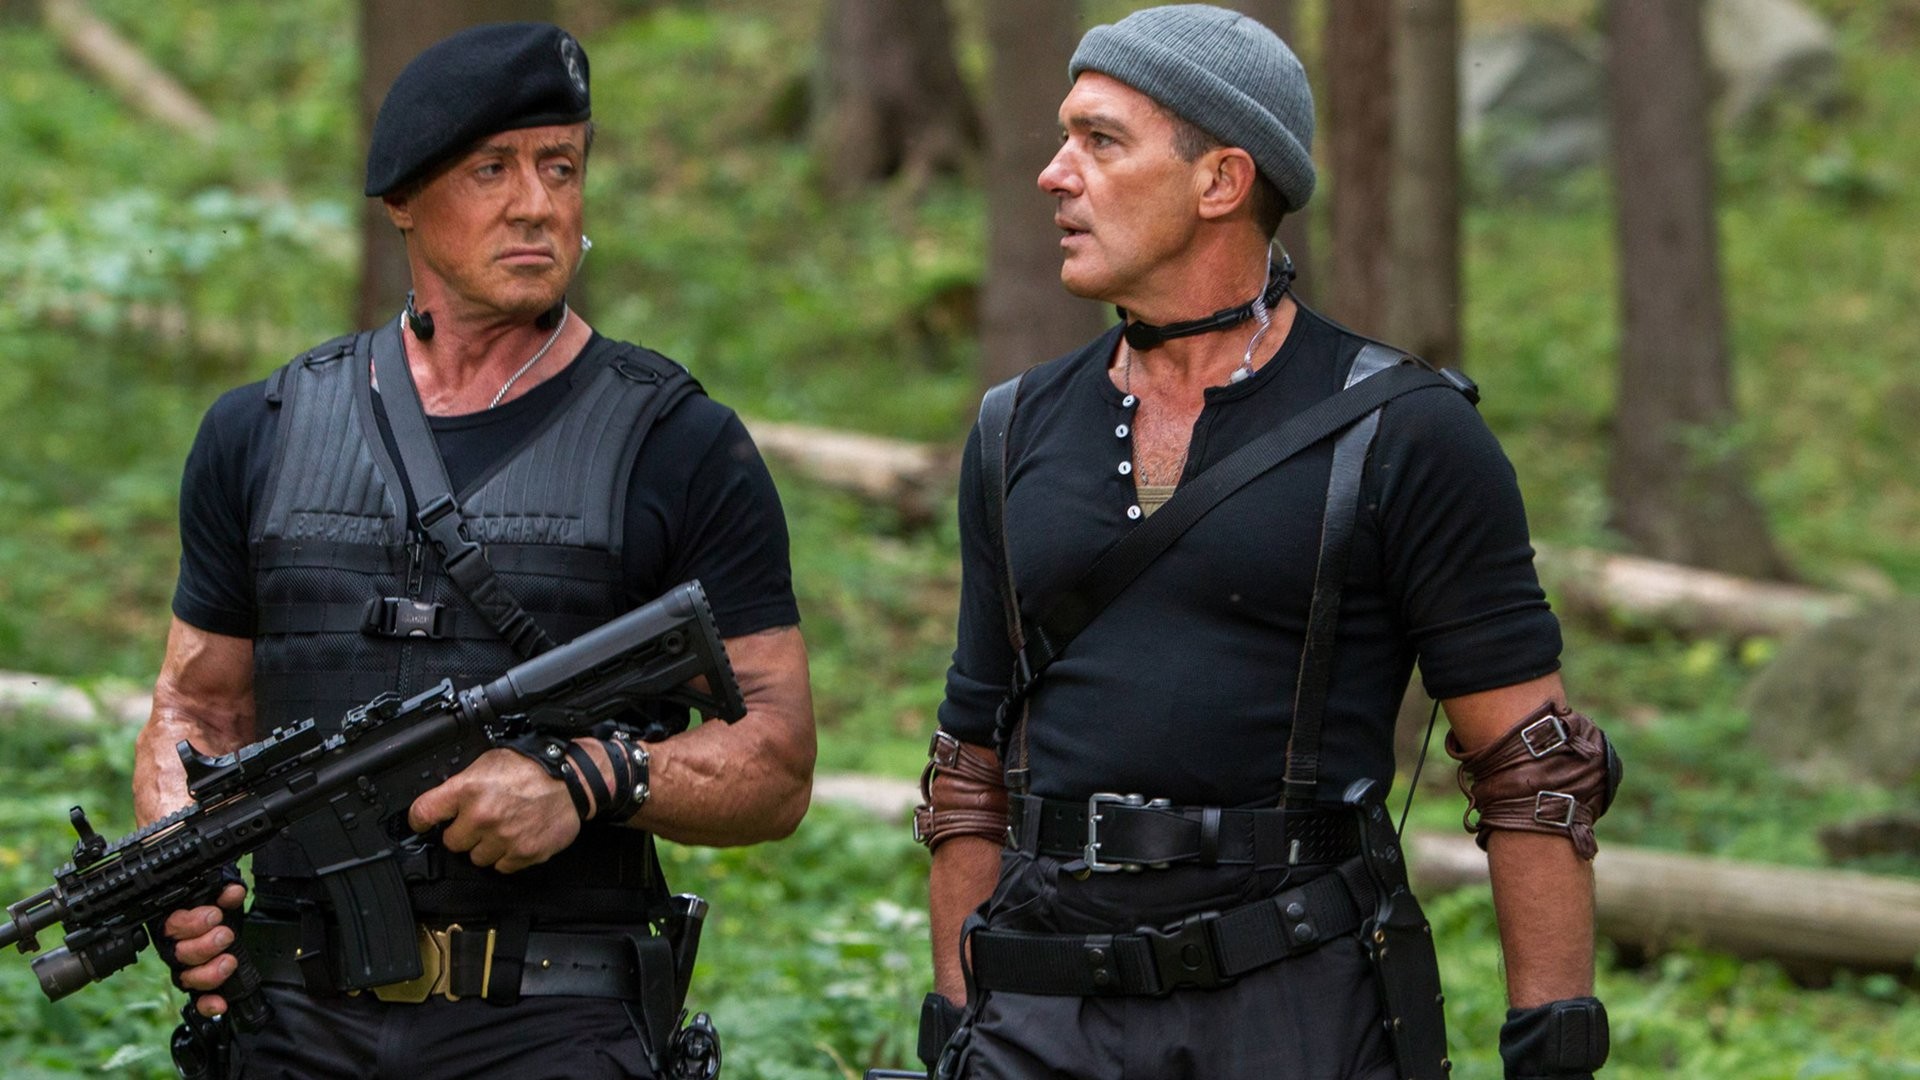 movie, the expendables 3, antonio banderas, barney ross, galgo (the expendables), sylvester stallone, the expendables